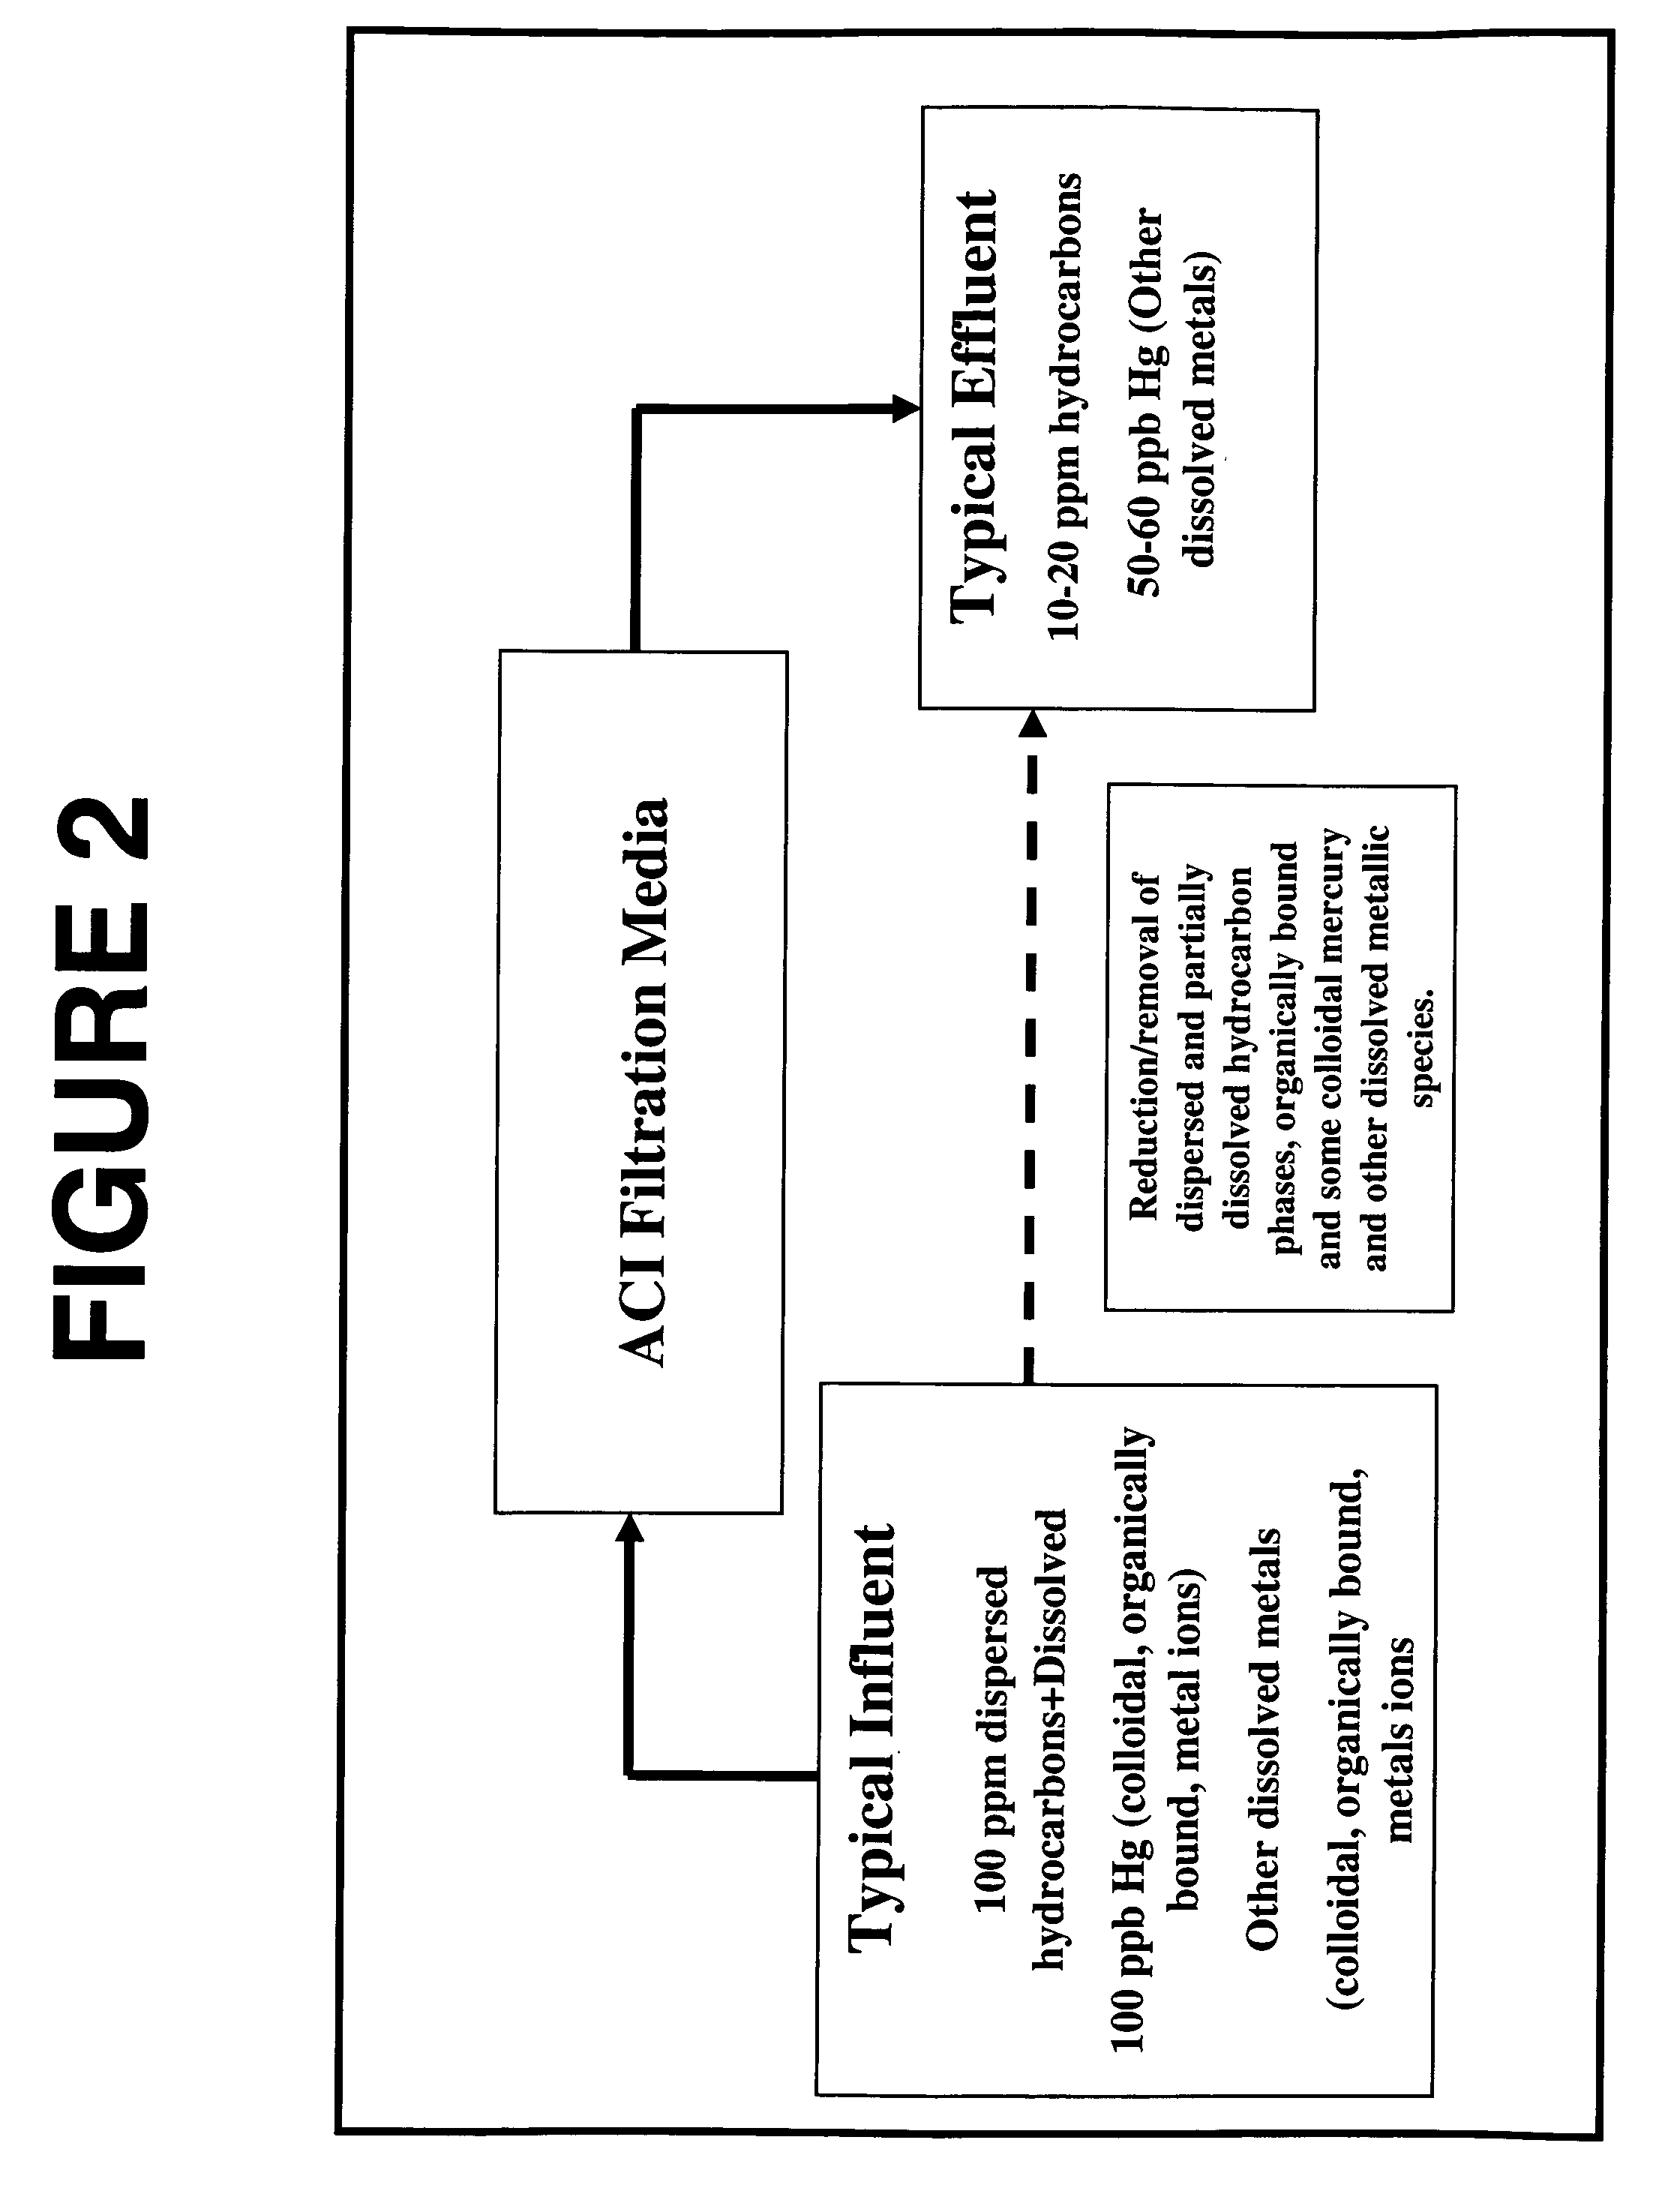 Process and system for removal of contaminants from industrial streams